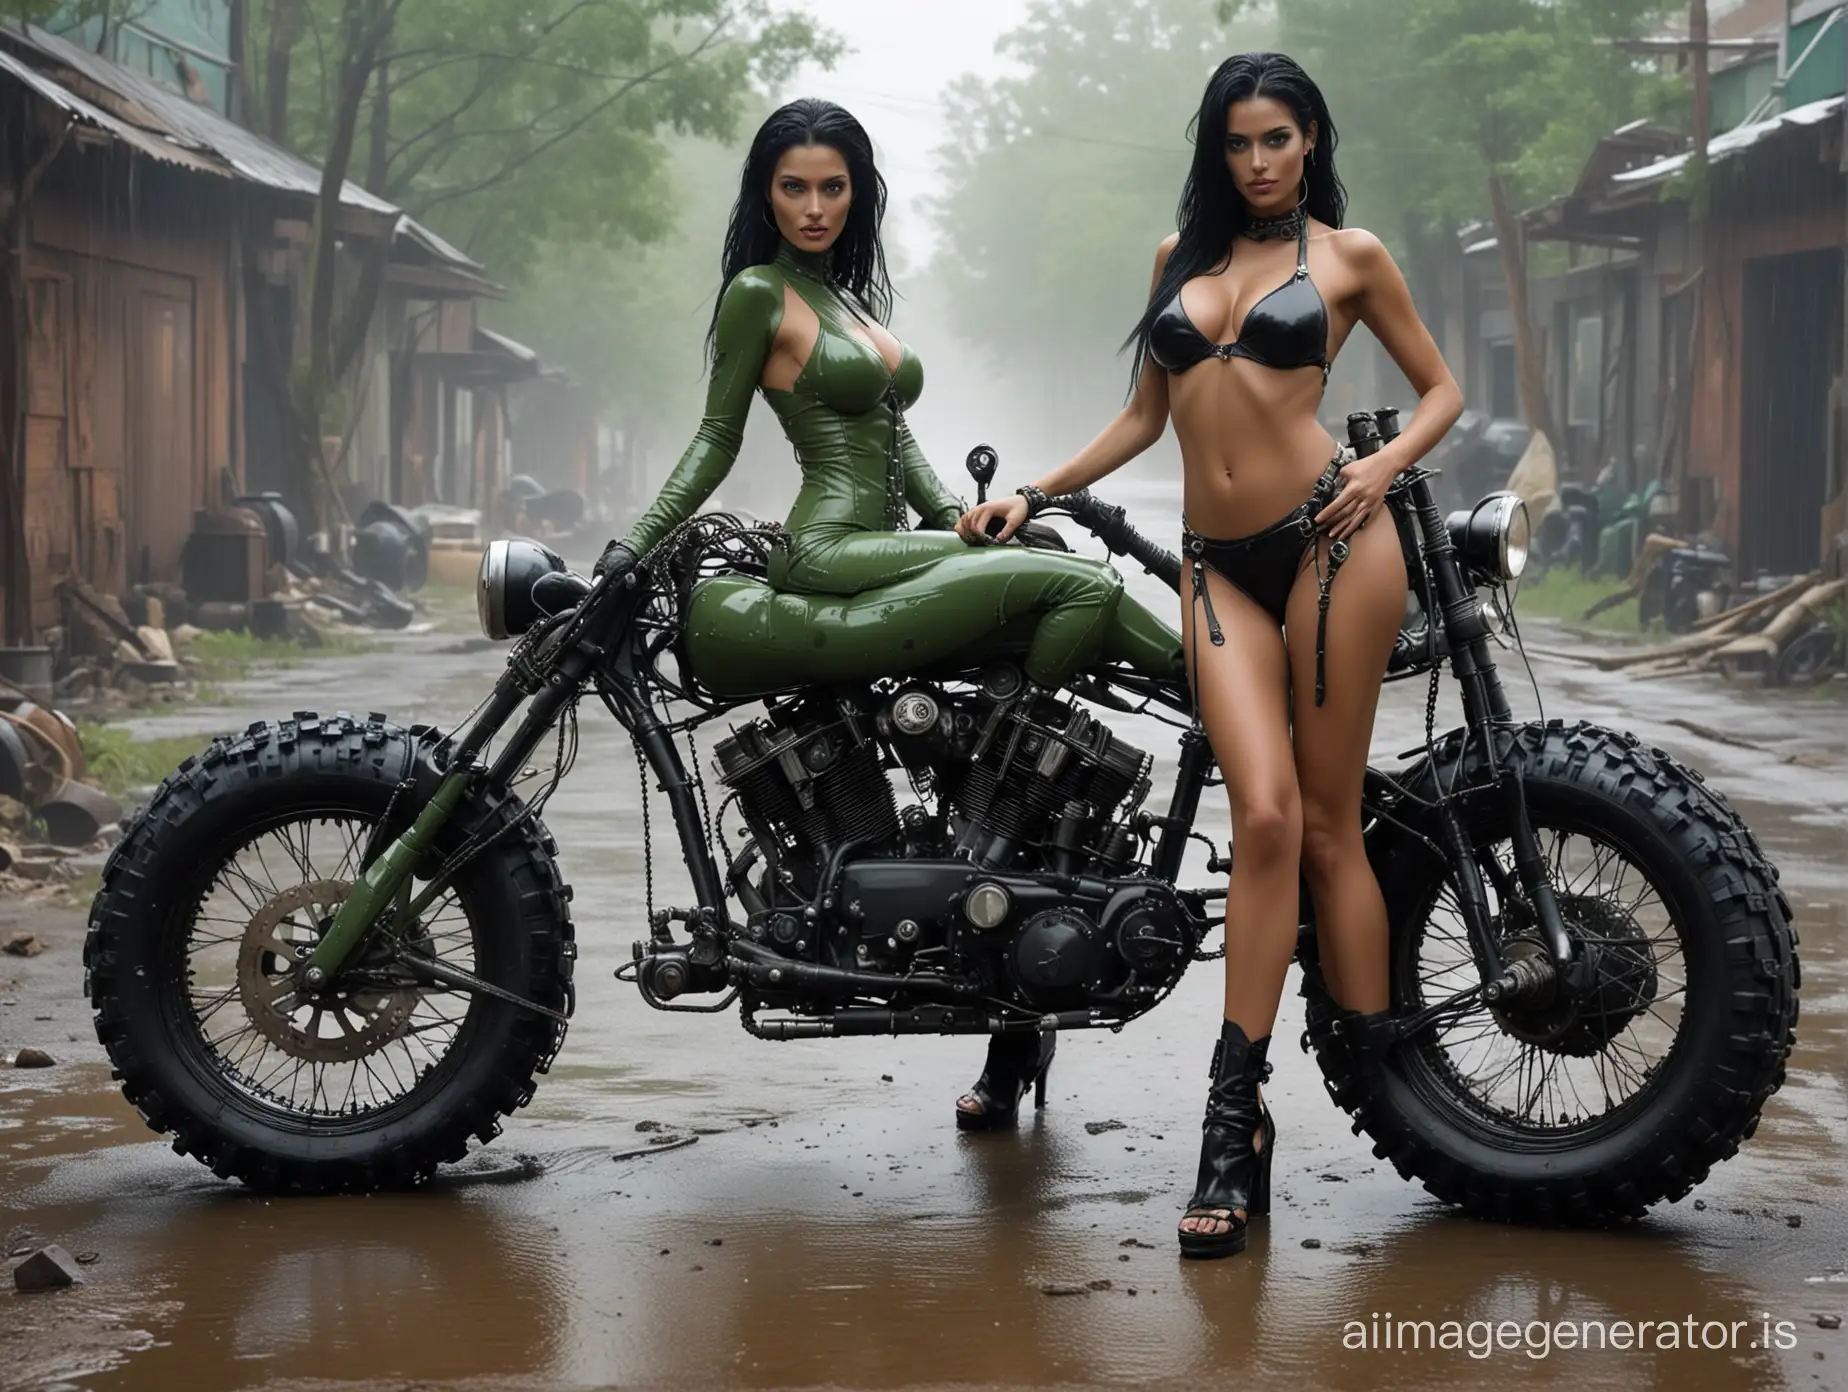 Yasmeen-Ghauri-in-Lovecraftian-Horror-Scene-with-Massive-Chained-Robotic-Engines-and-Harley-Fatboy-Bike